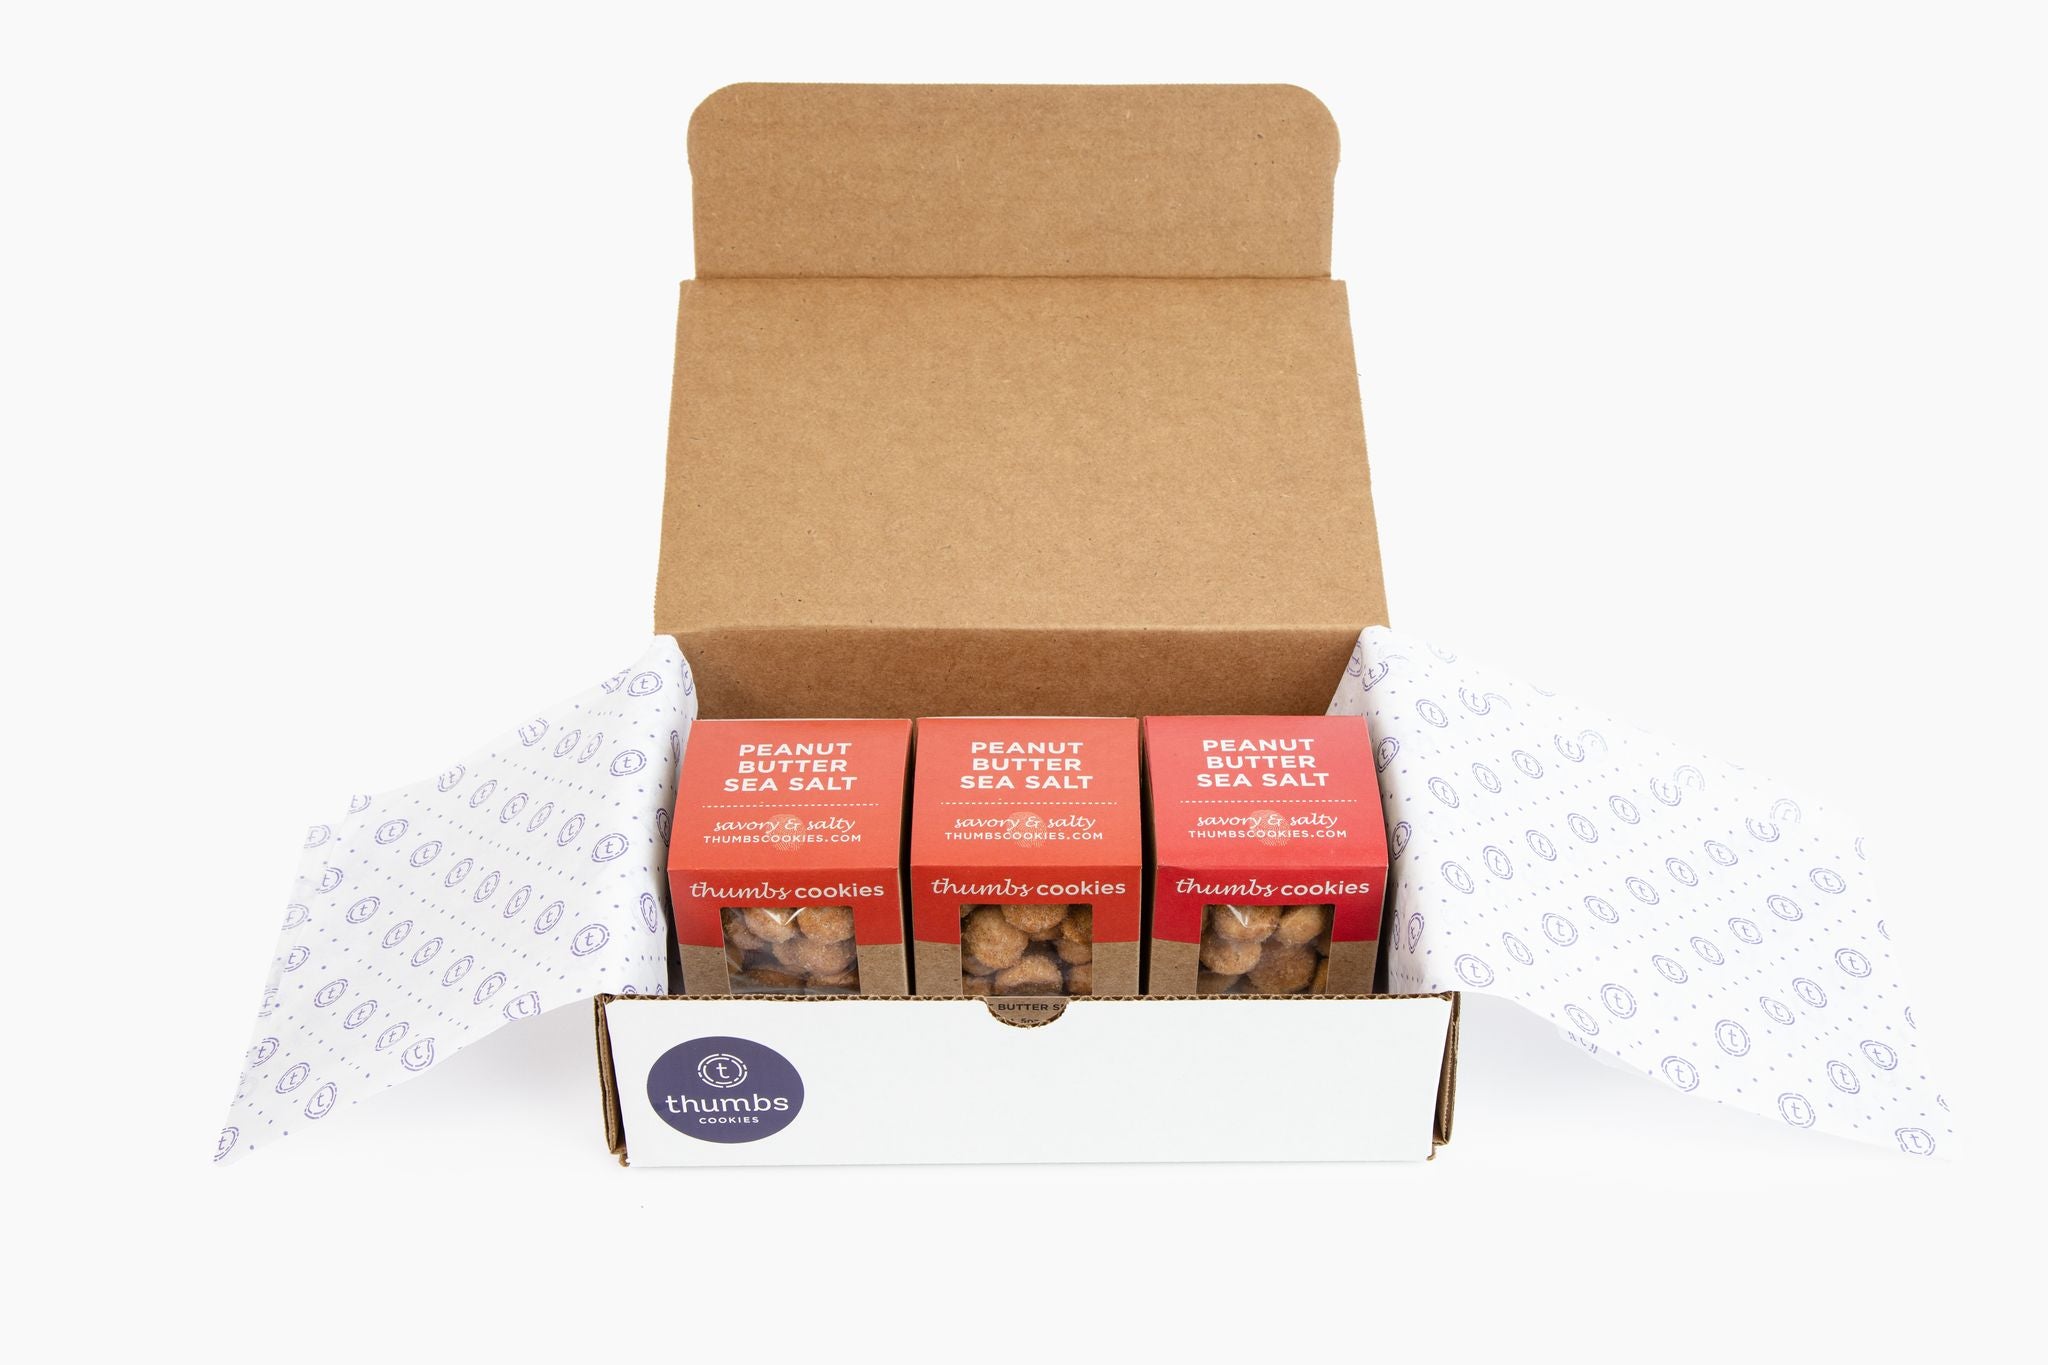 Thumbs Cookies Monthly Subscription Box